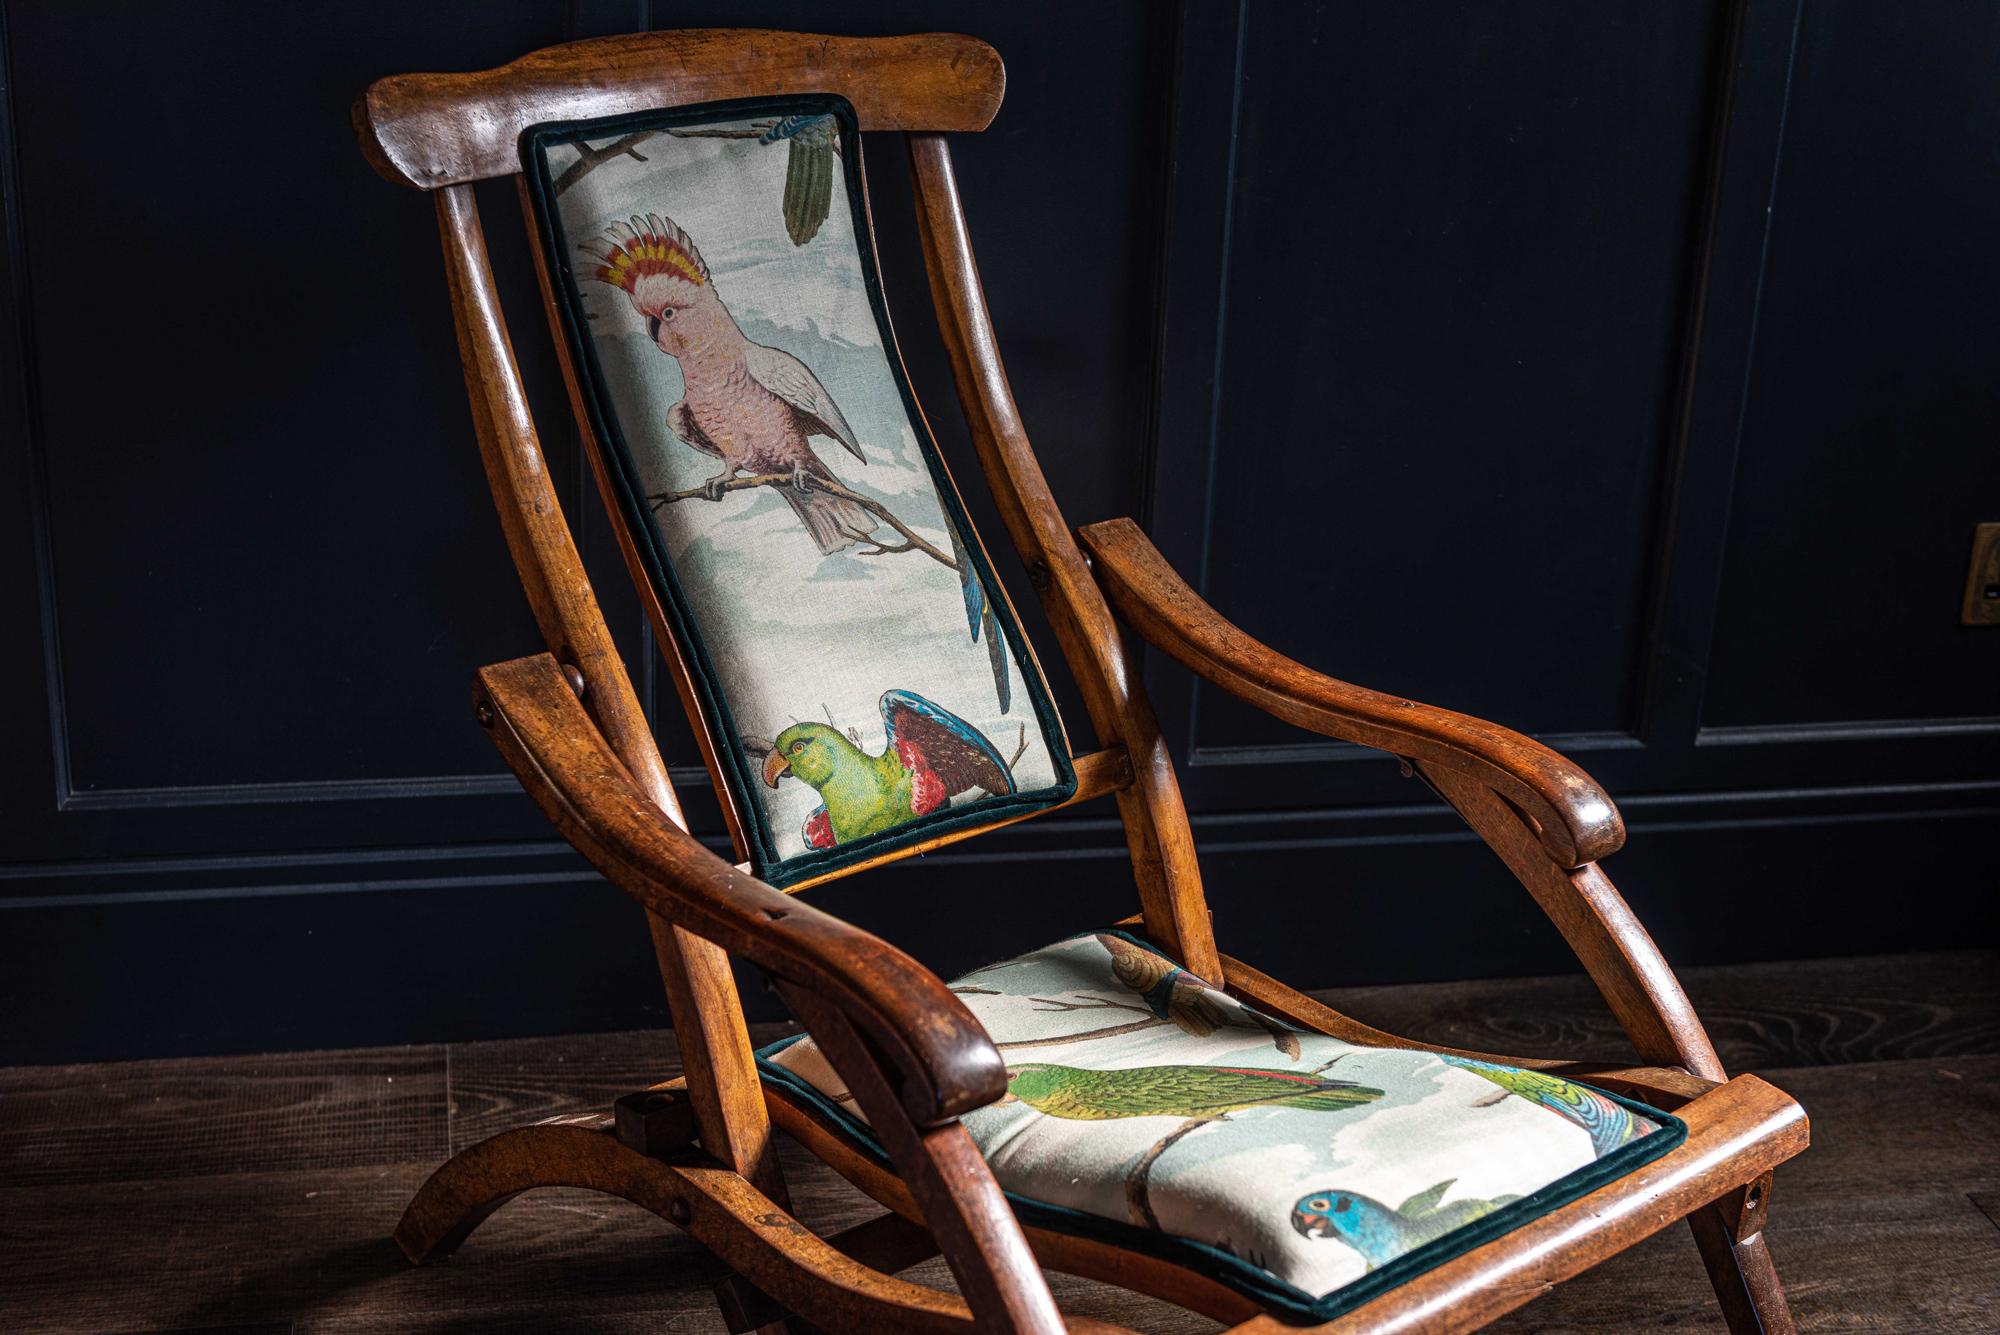 English folding mahogany steamer deck chair, late 19th century, circa 1890
Re-upholstered in 'Designers Guild' parrot aviary, sky blue linen

With scrolled arms, has a strong elegant and stylish design. The sloping back and seat, shaped to give a